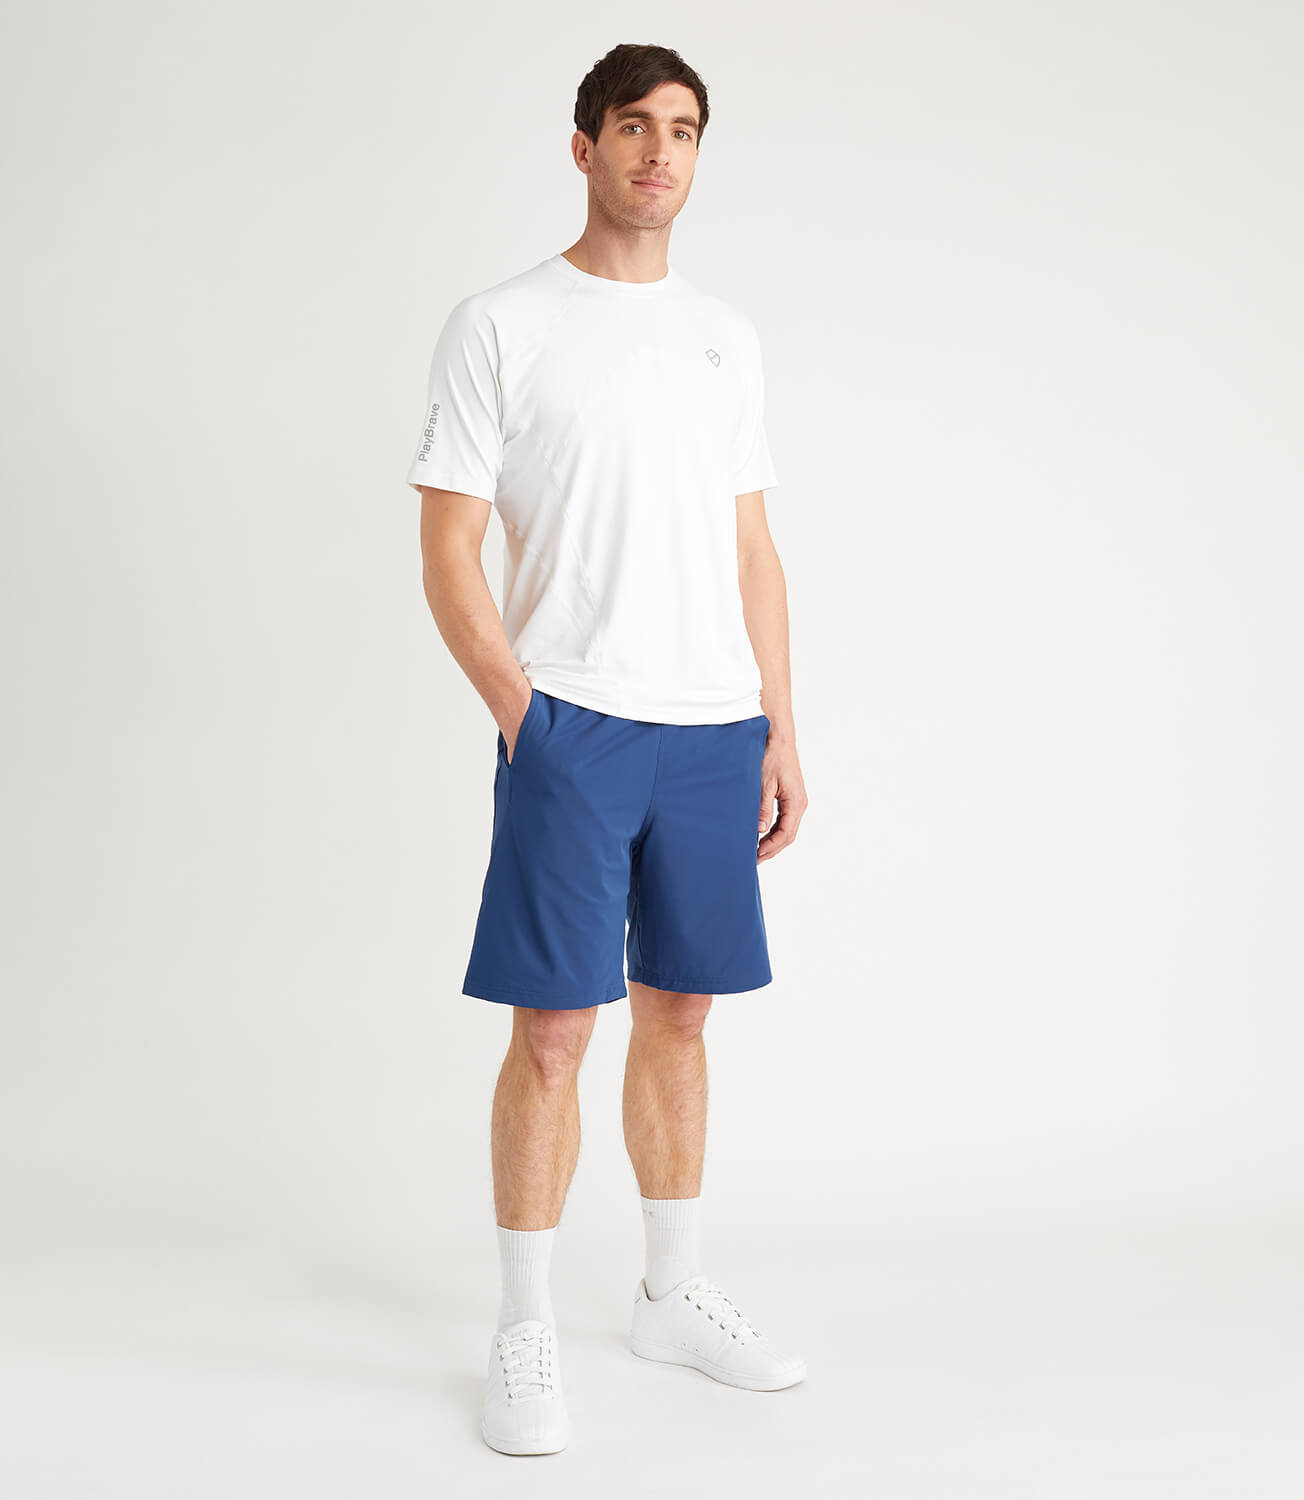 Terence Technical Tee - White